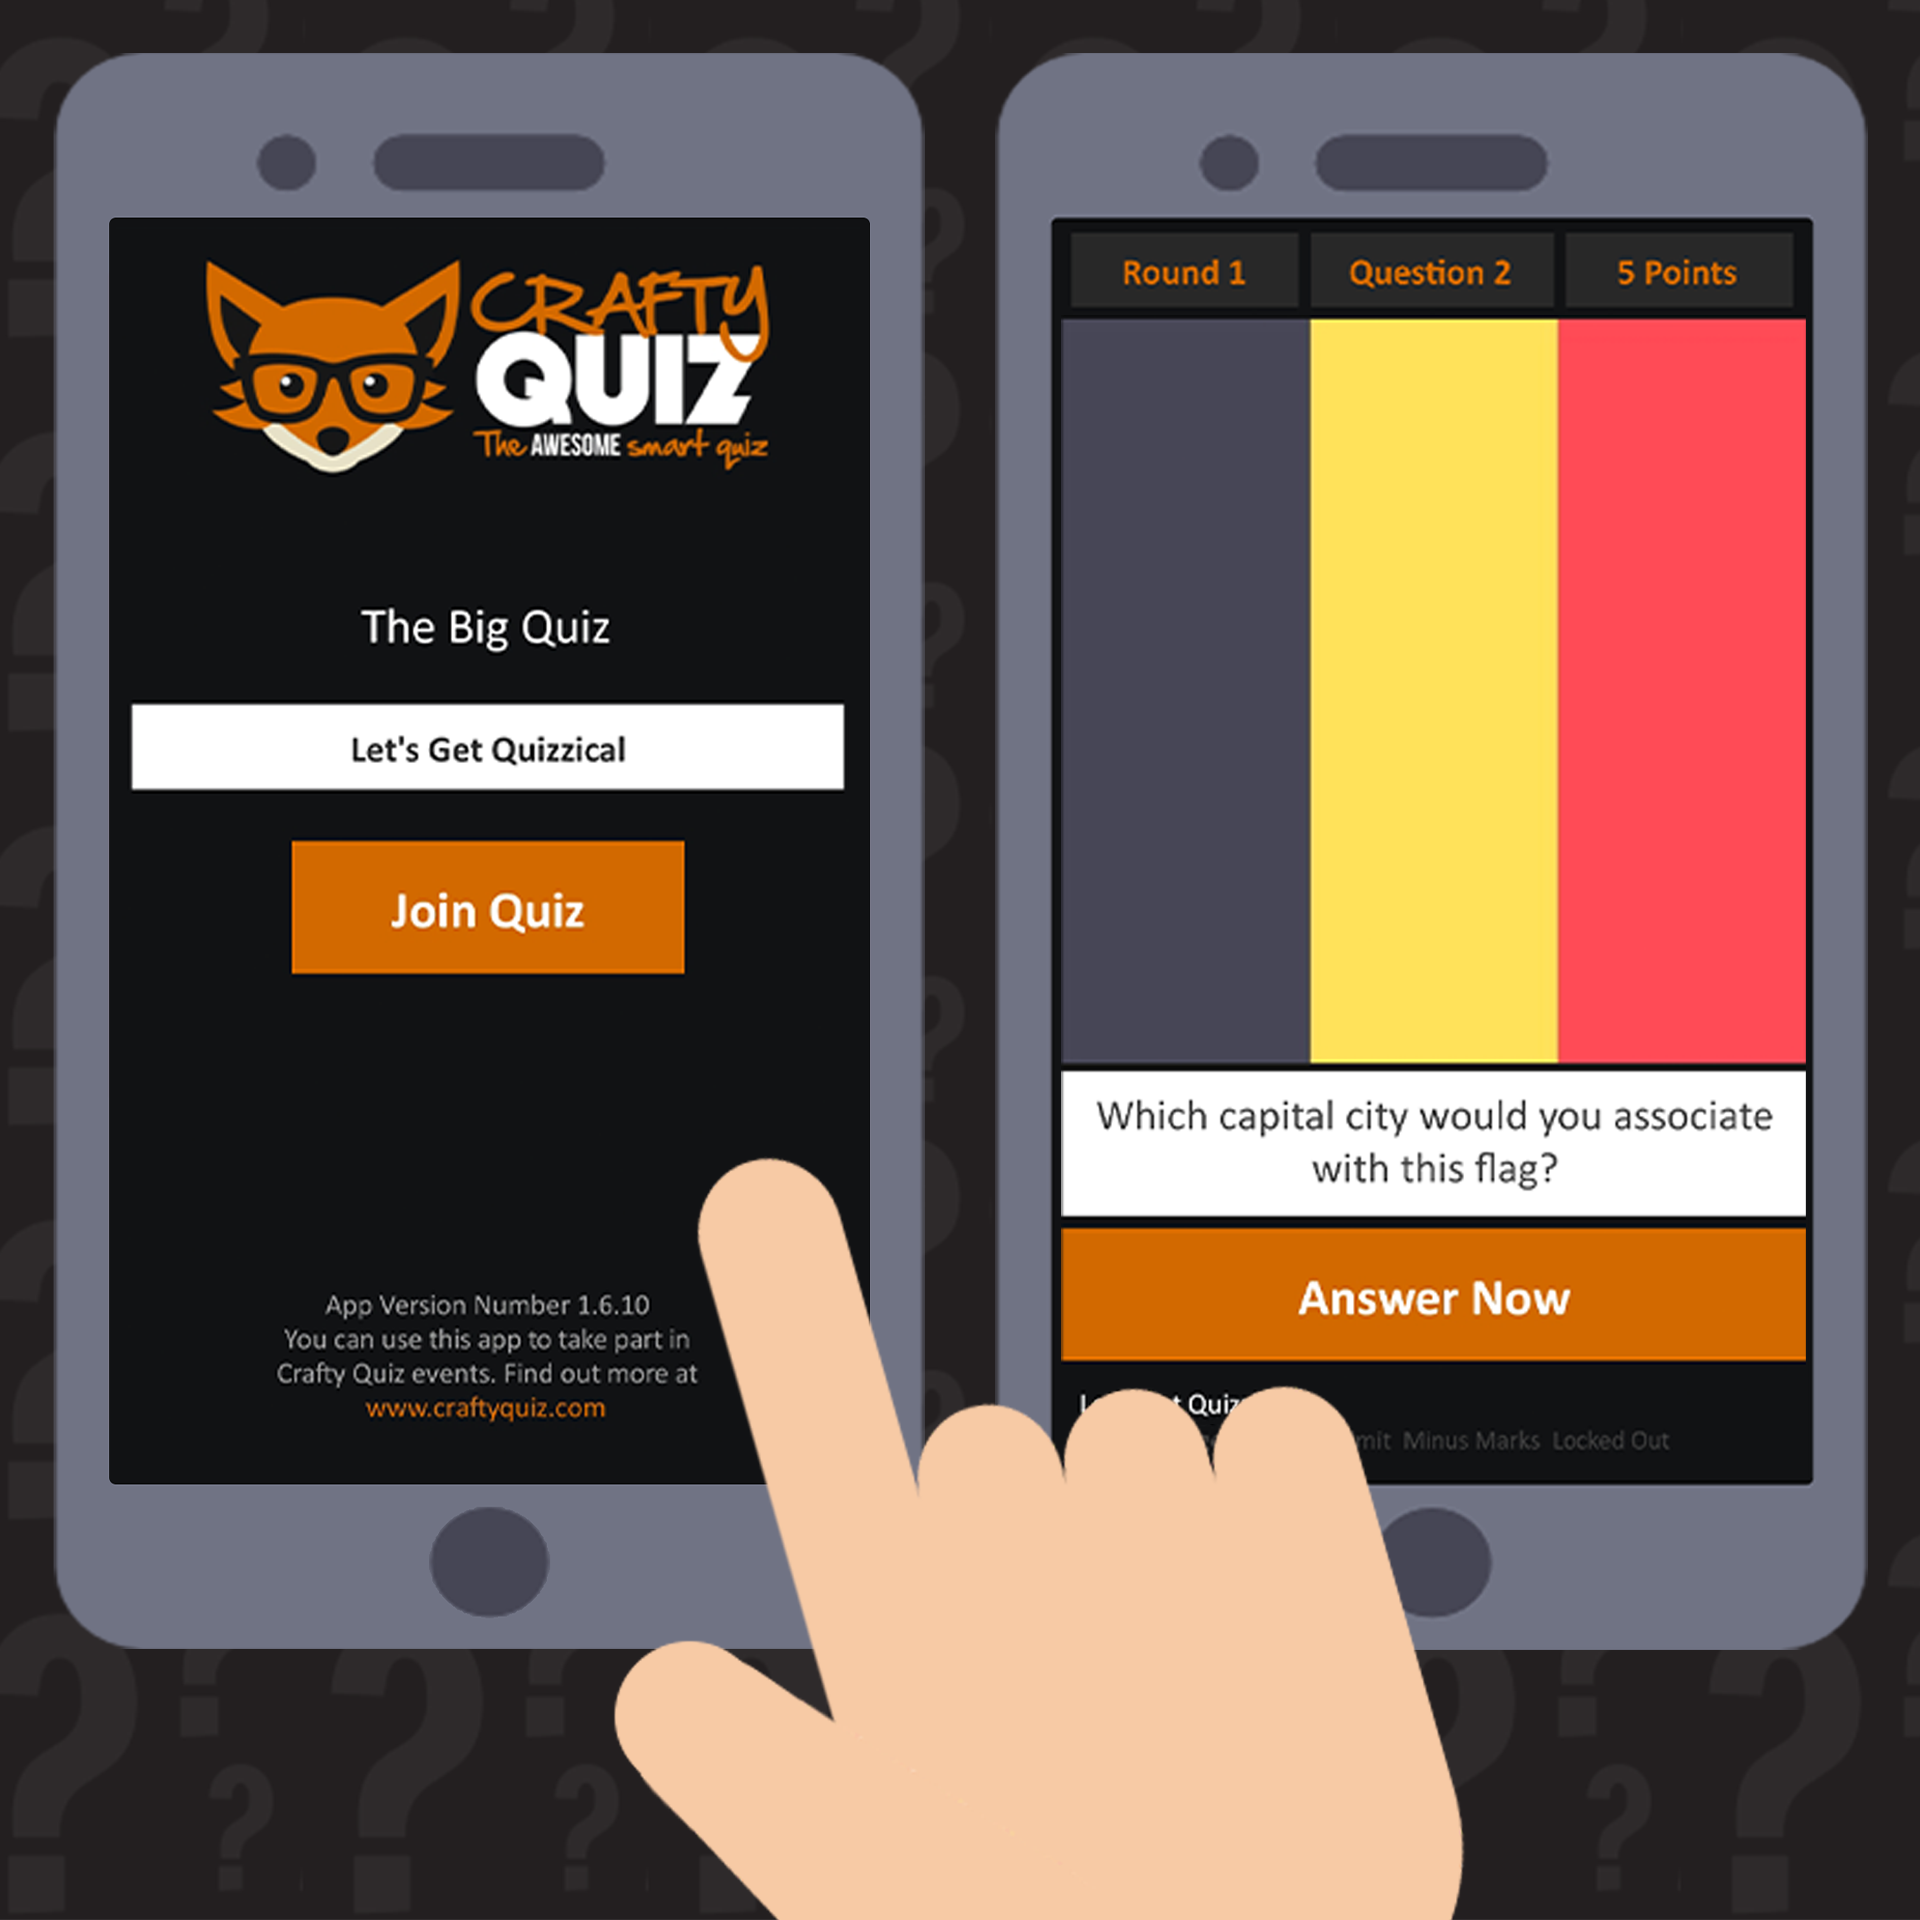 Let the Game begin playing Housie Quiz on Smartphones!!